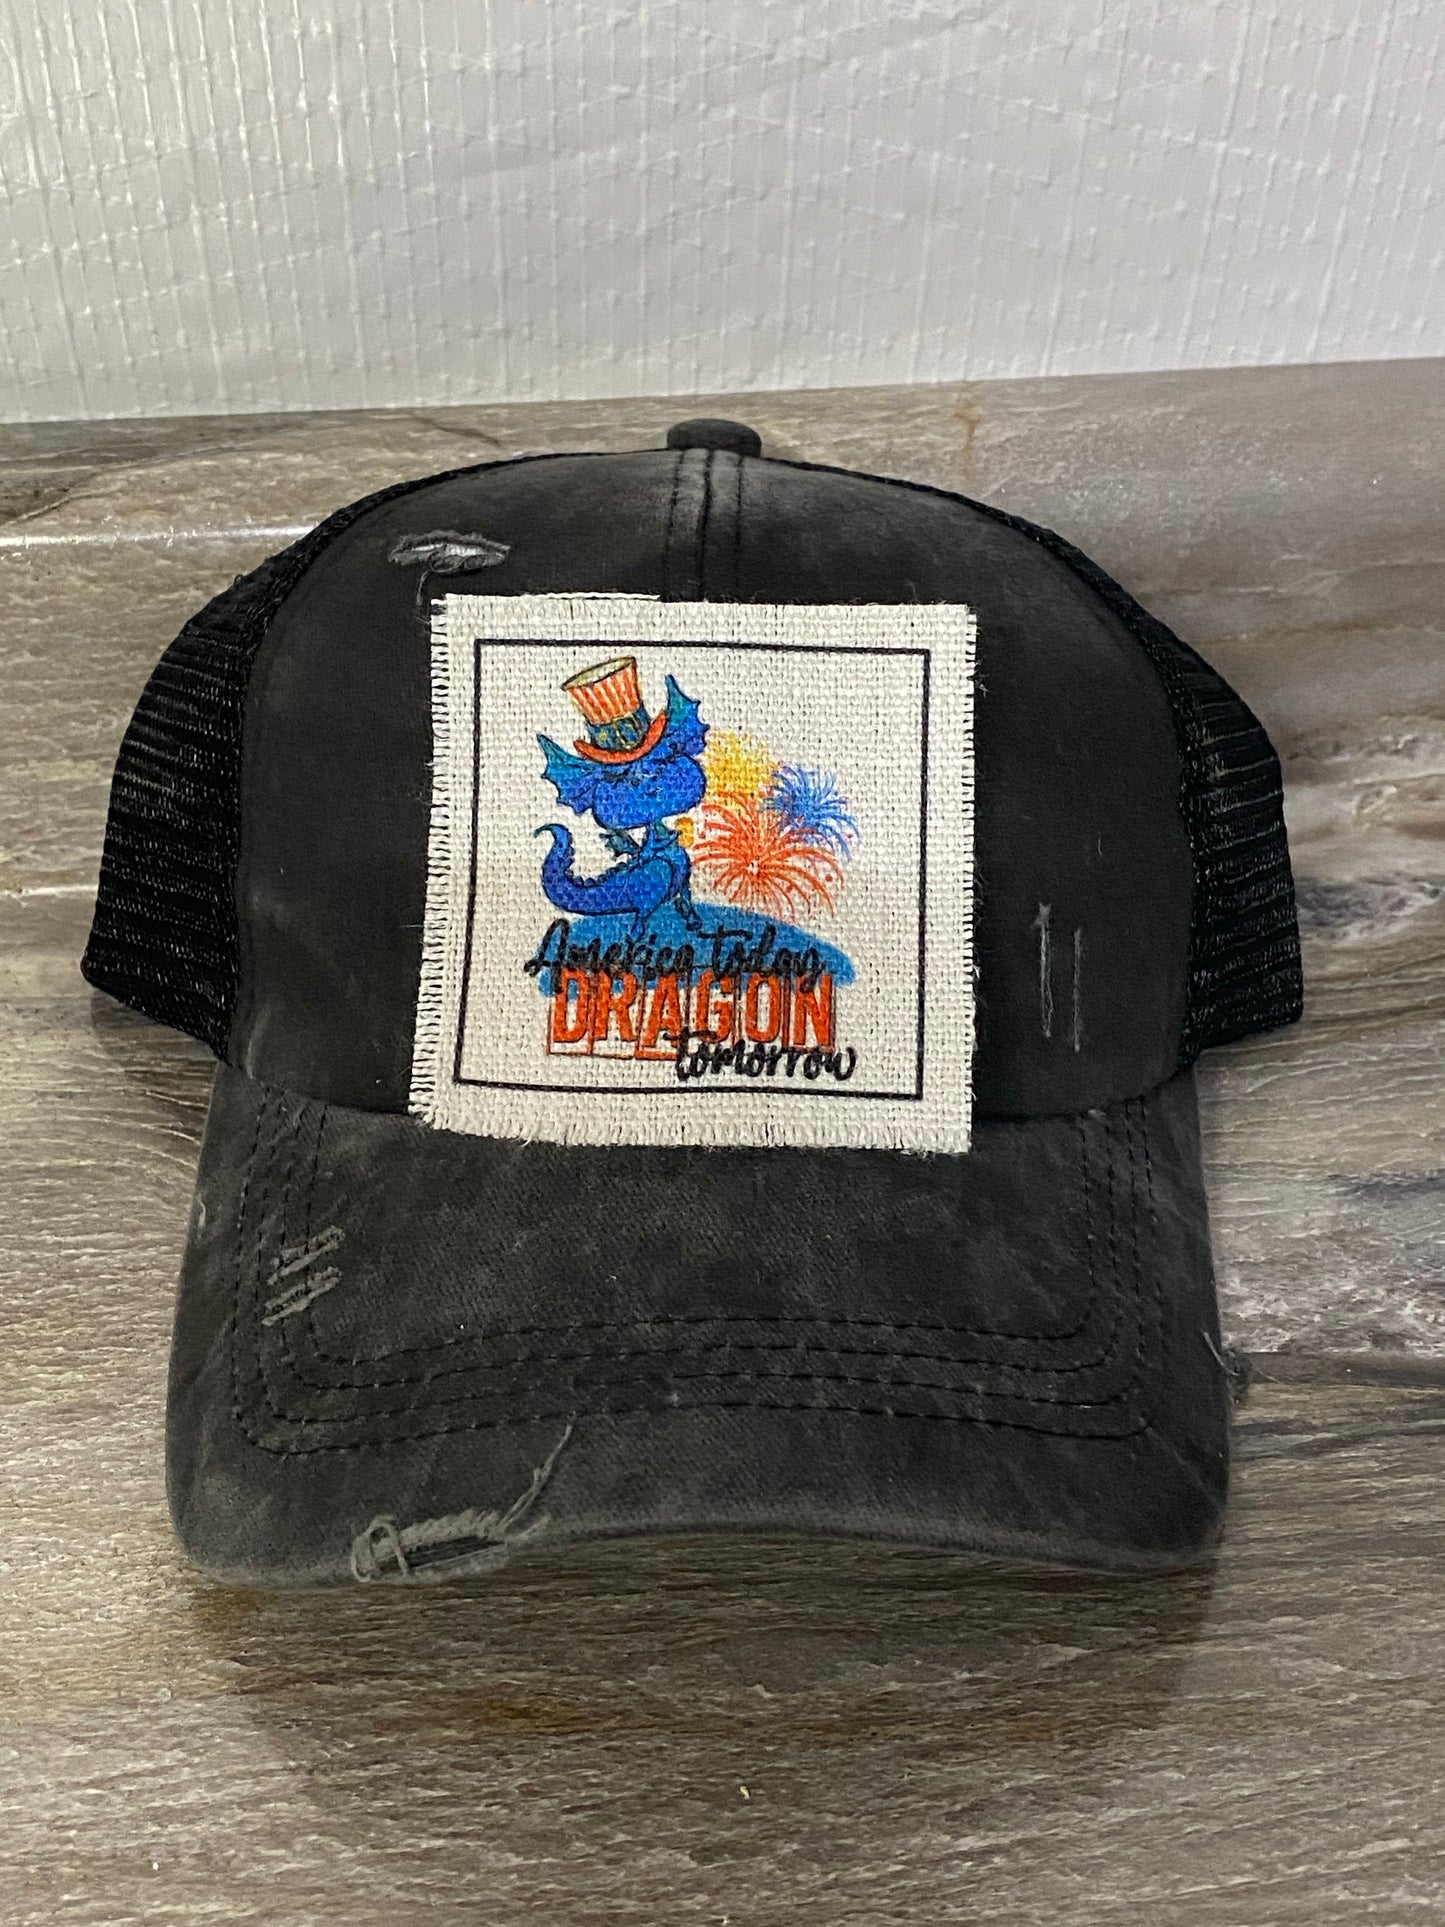 America Today Dragon Tomorrow Hat Patch